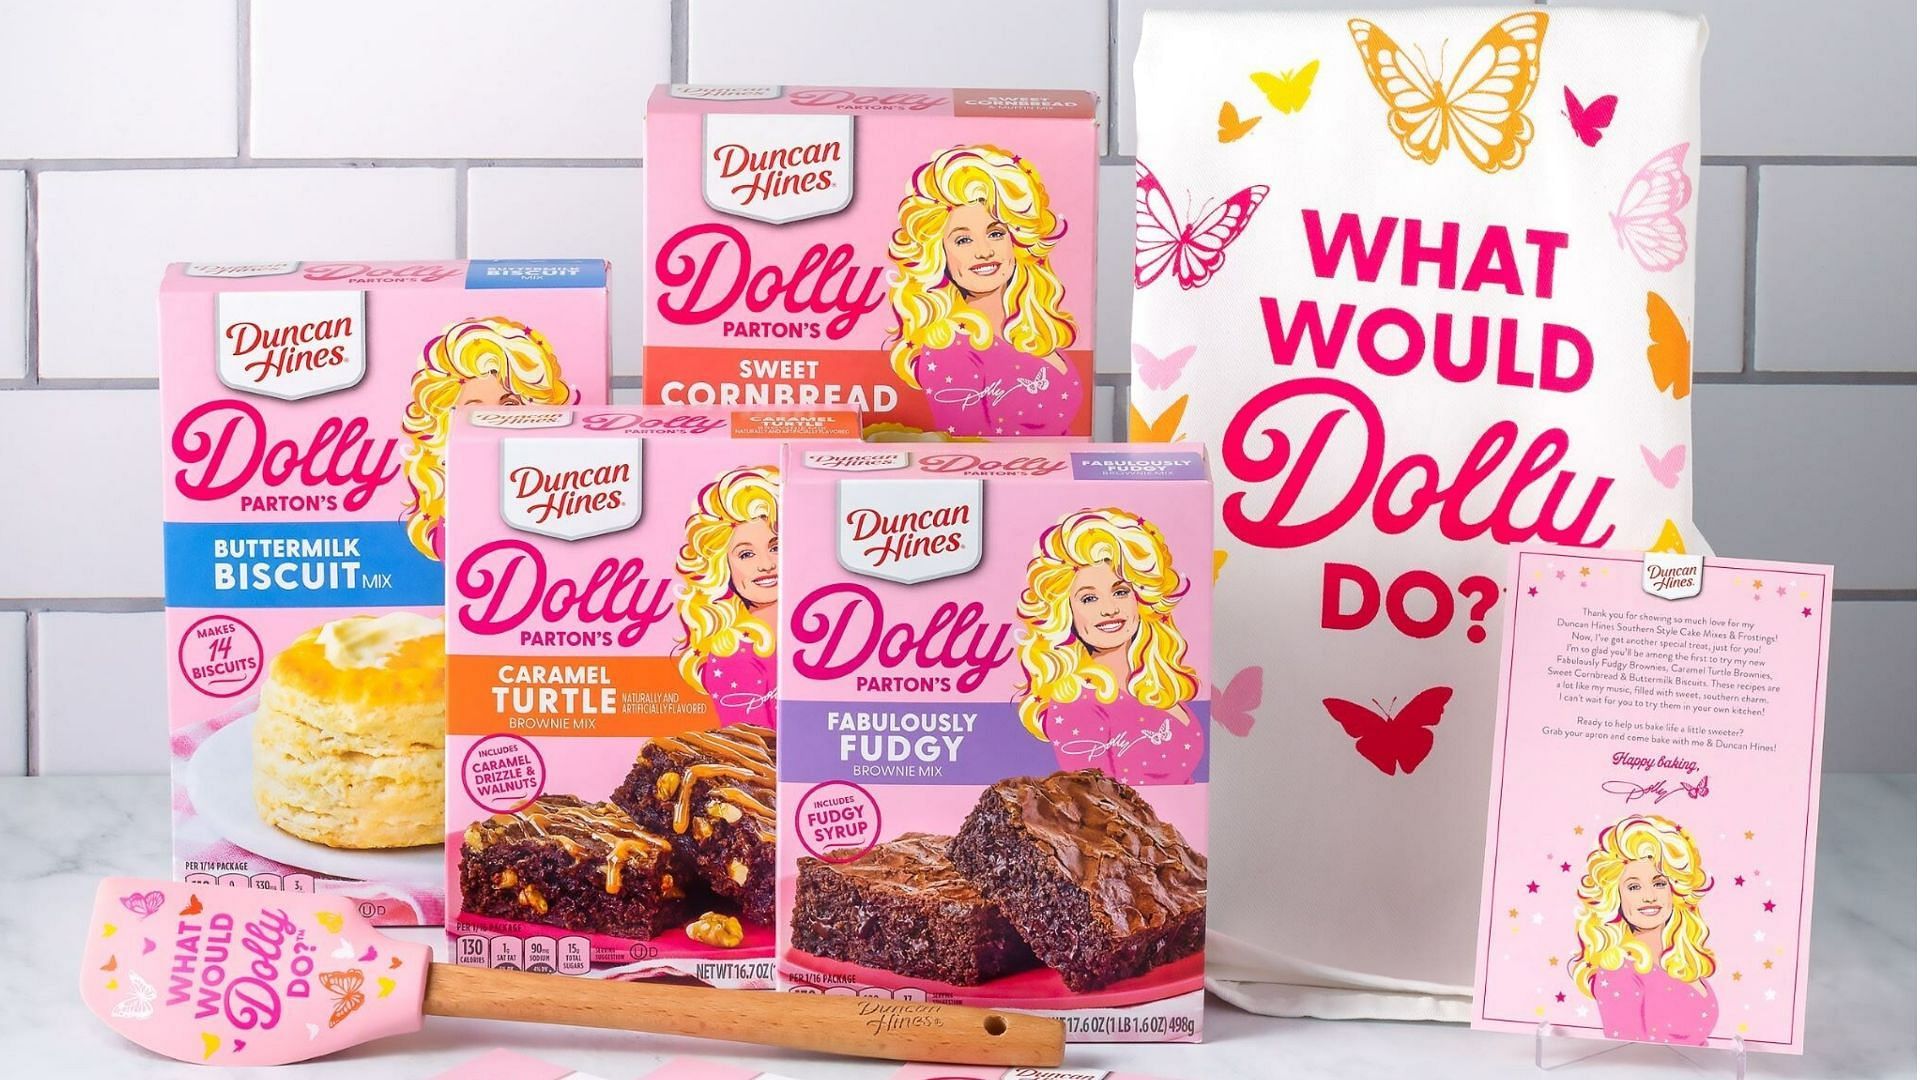 Dolly Paton and Duncan Hines come together for another partnership to release the Dolly Parton Duncan Hines Cake mixes kits (Image via Duncan Himes)